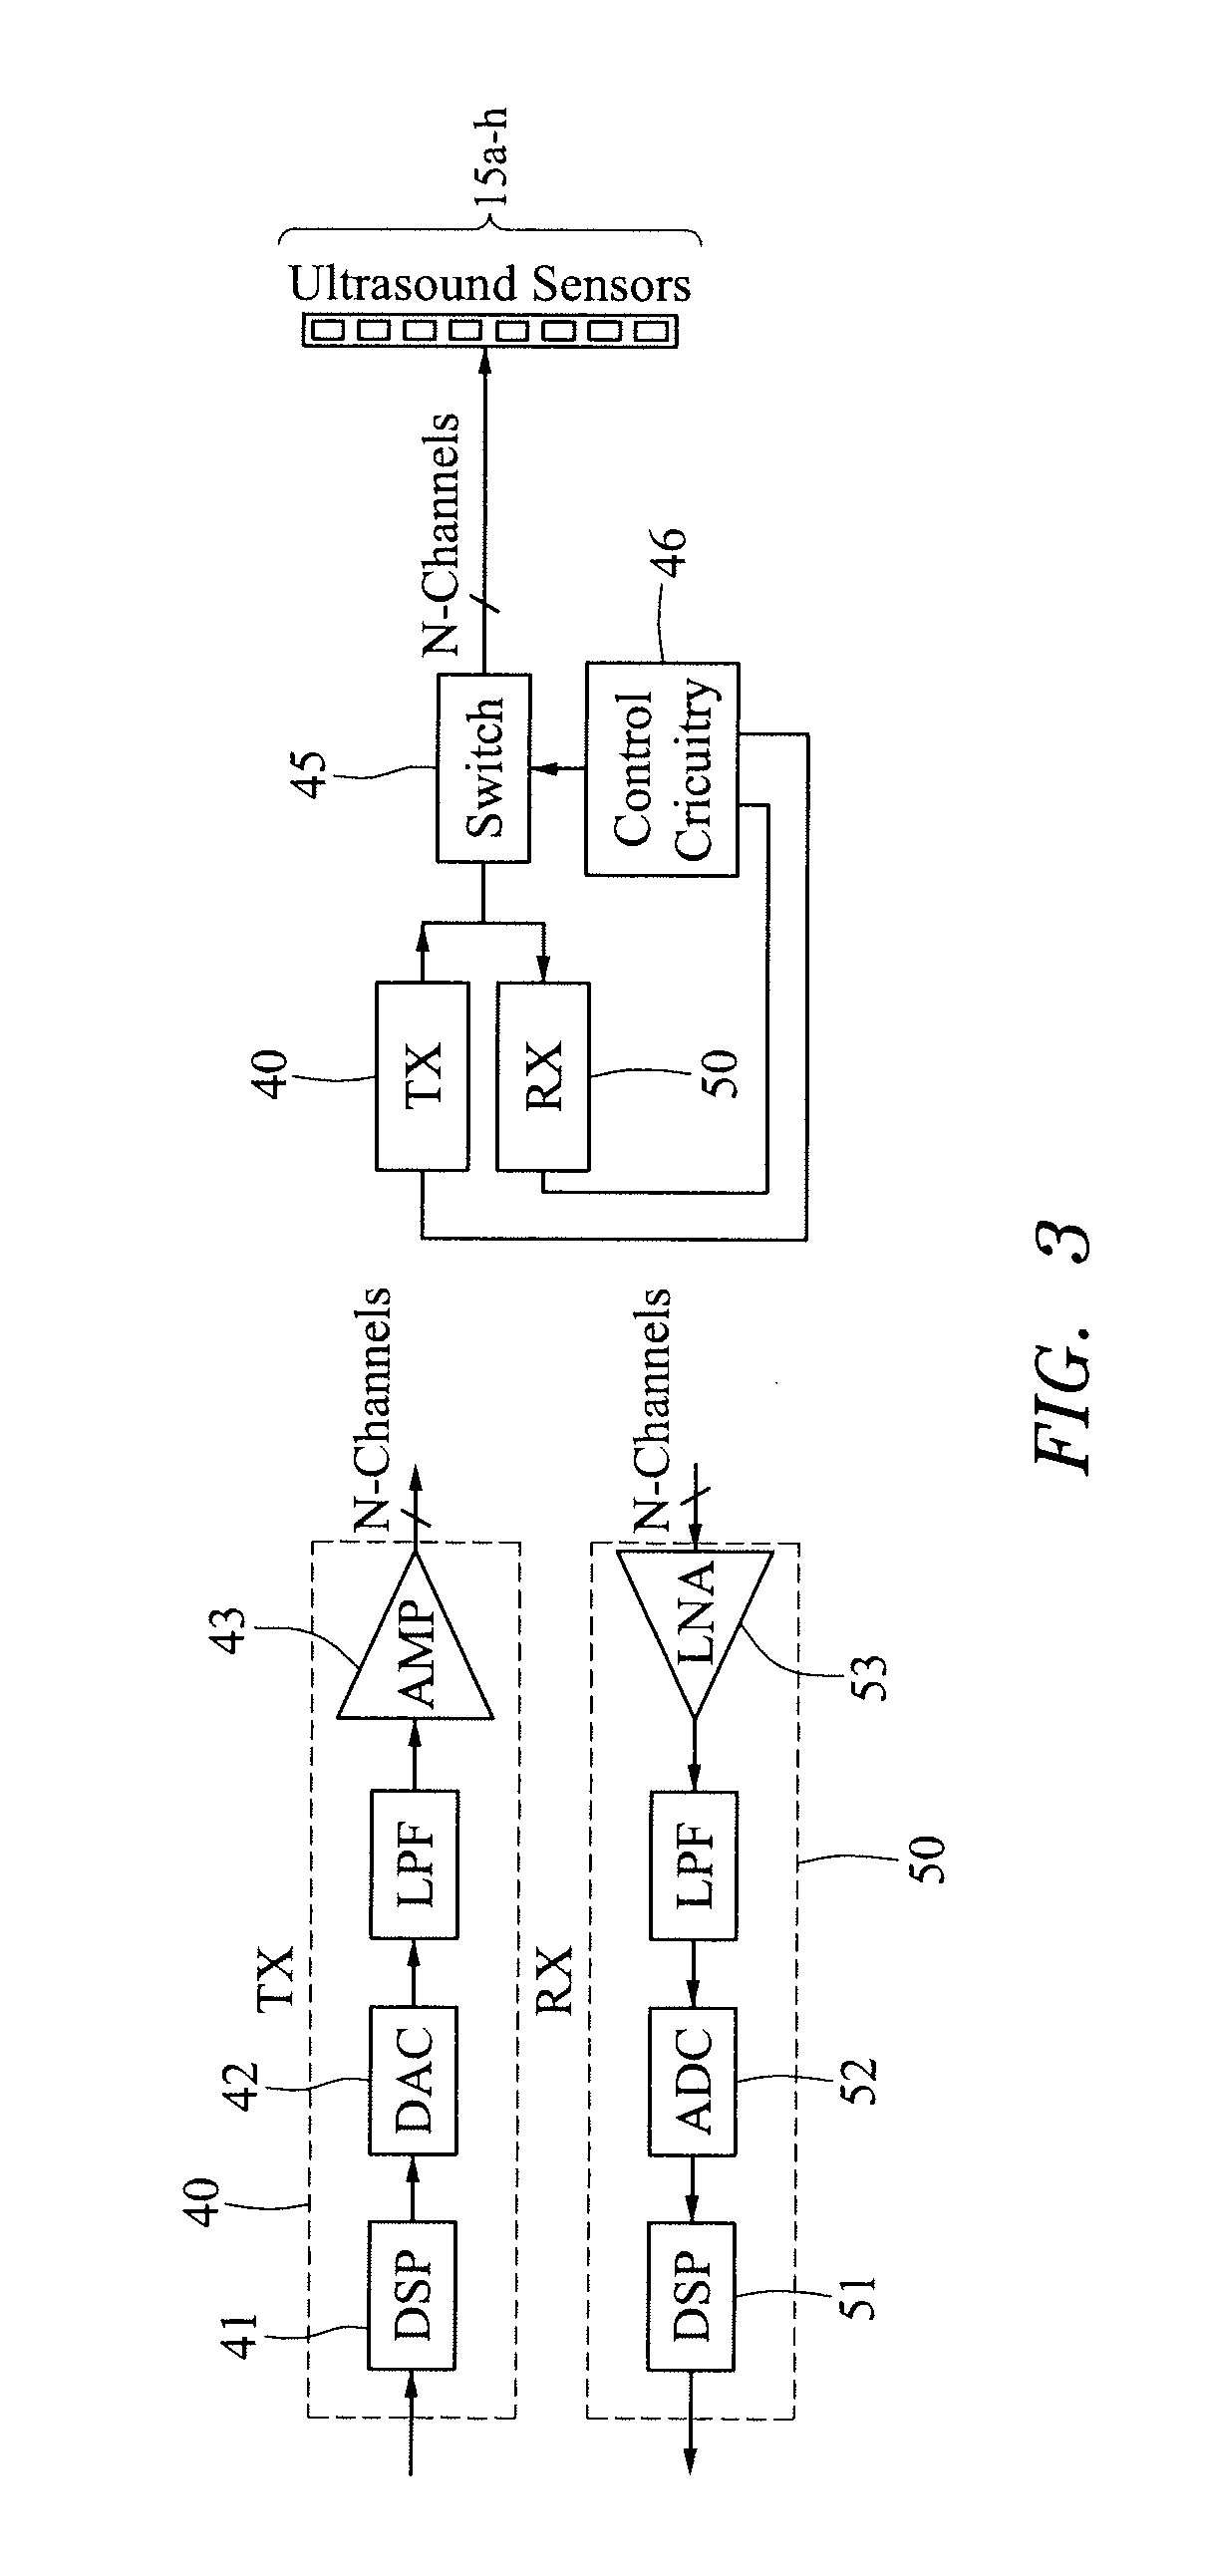 Integrated wearable device for detection of fetal heart rate and material uterine contractions with wireless communication capability